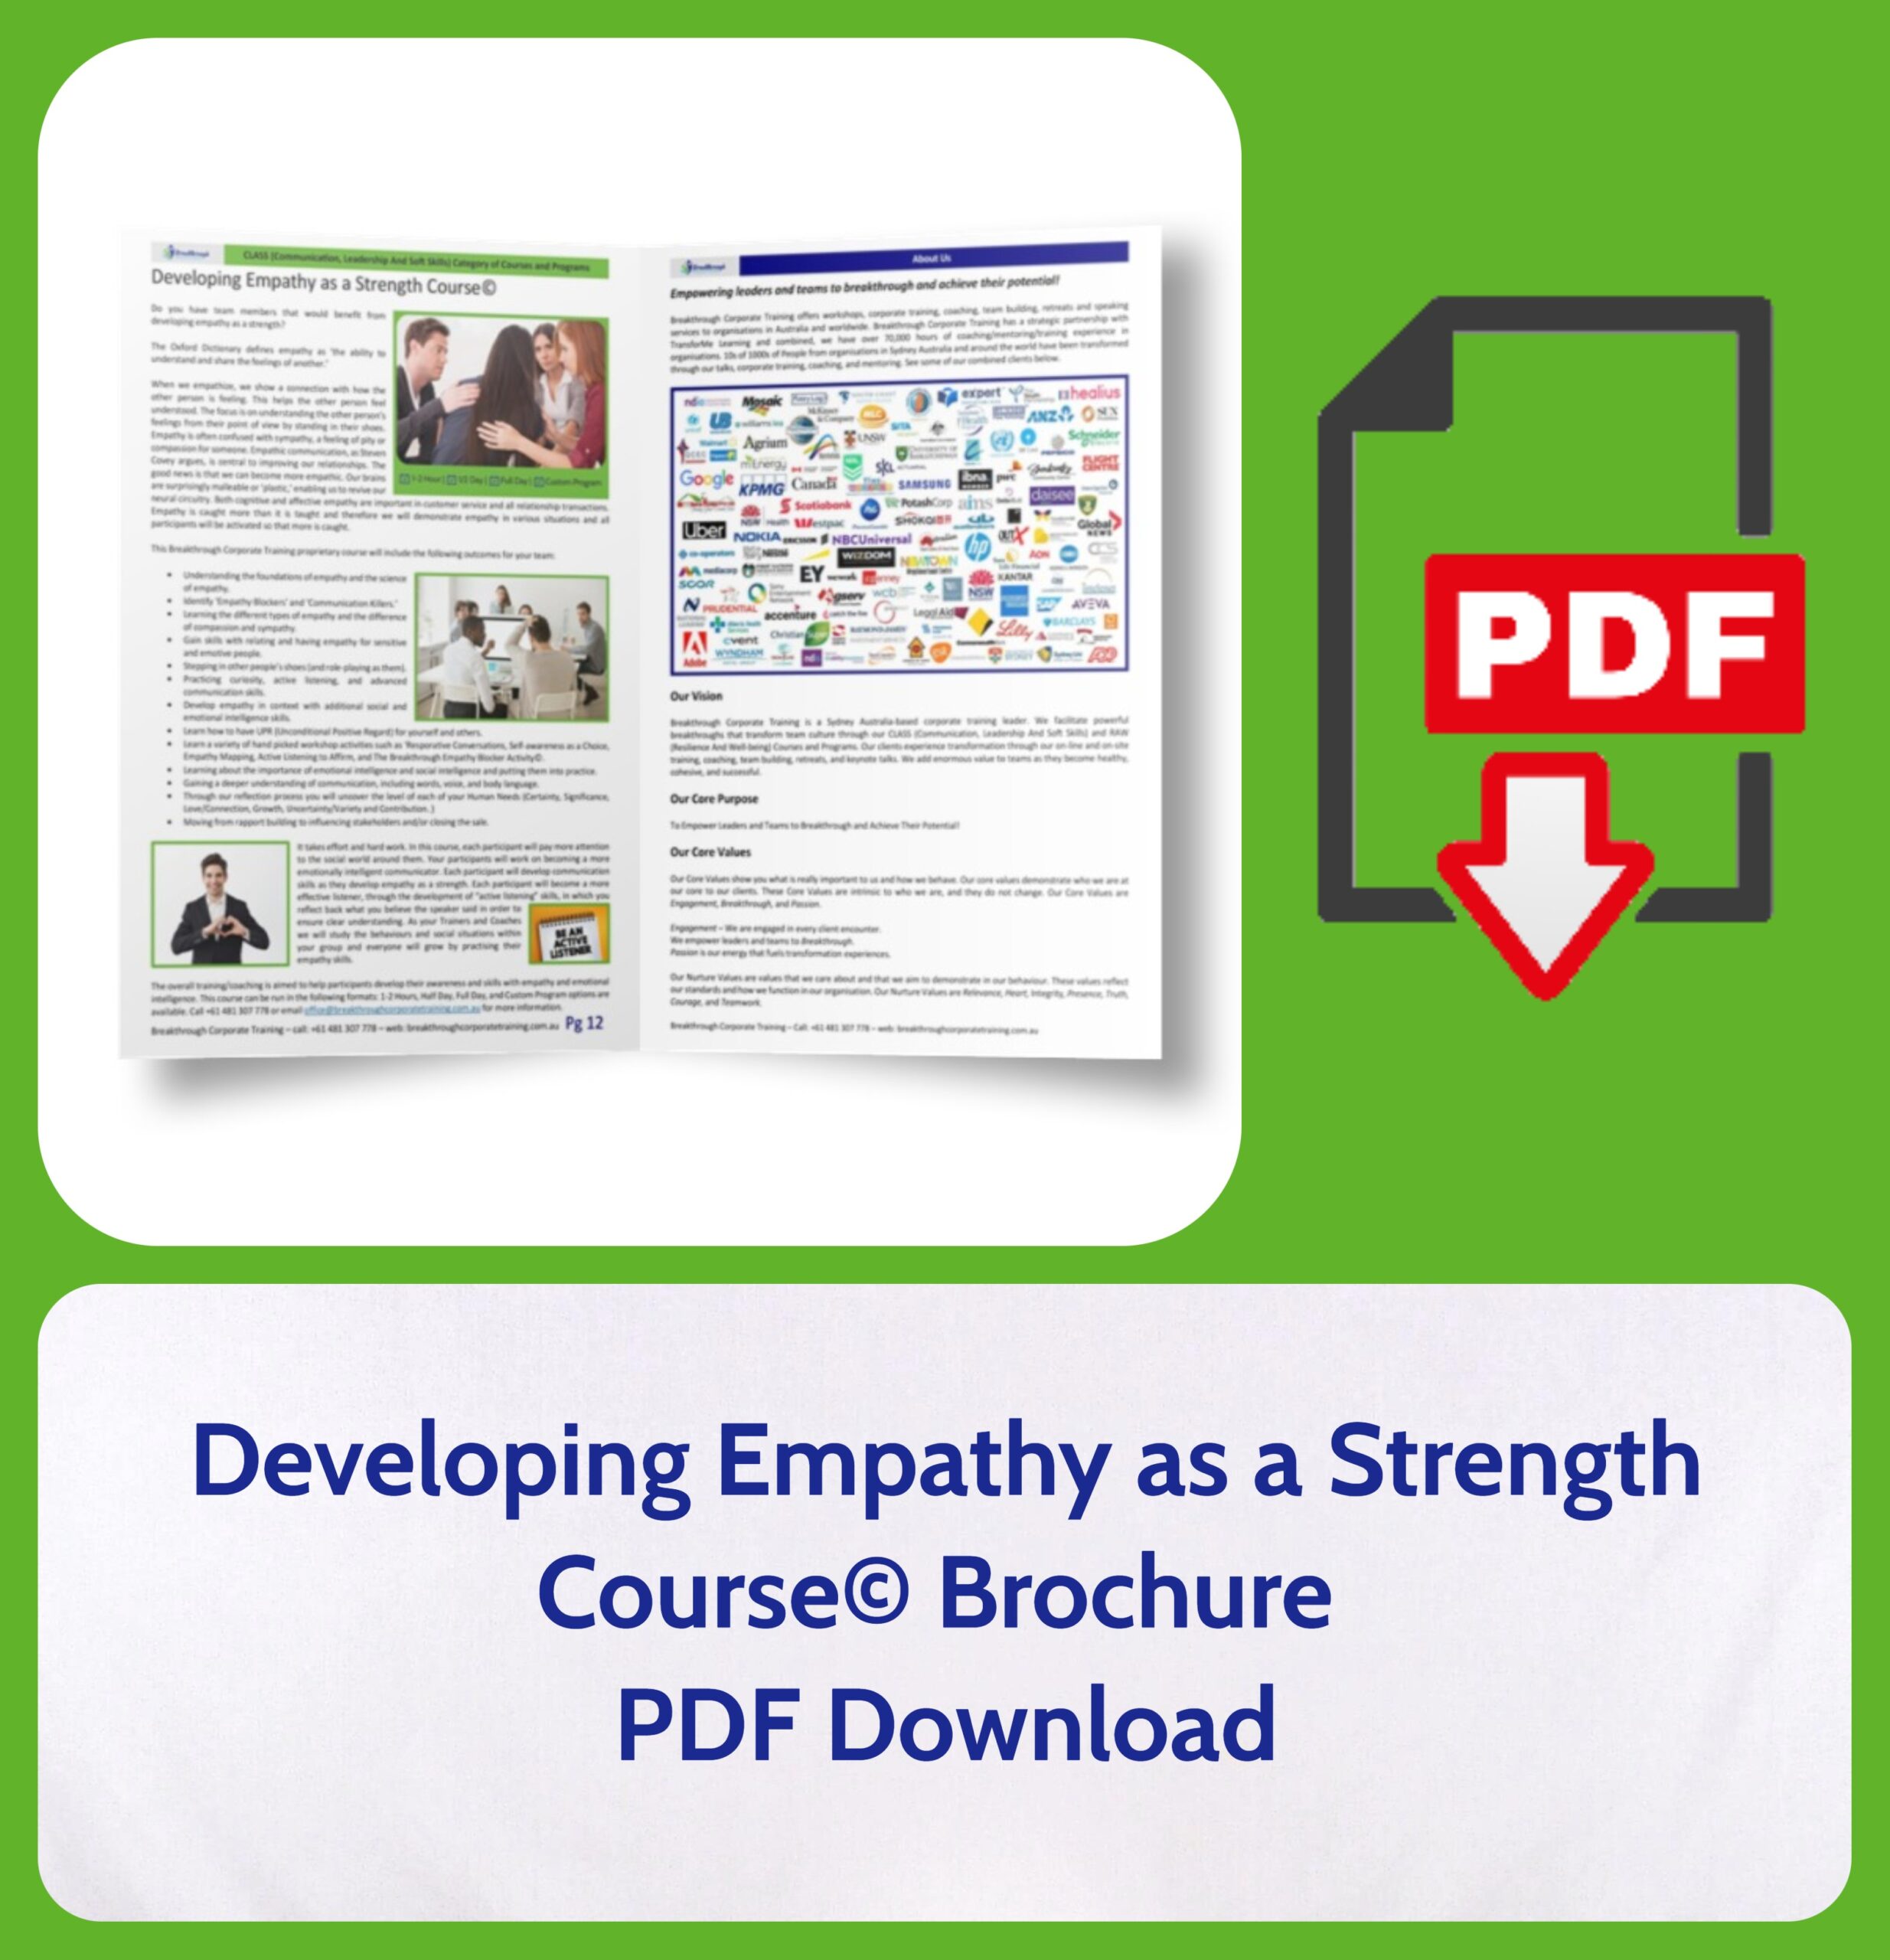 Developing Empathy as a Strength Course